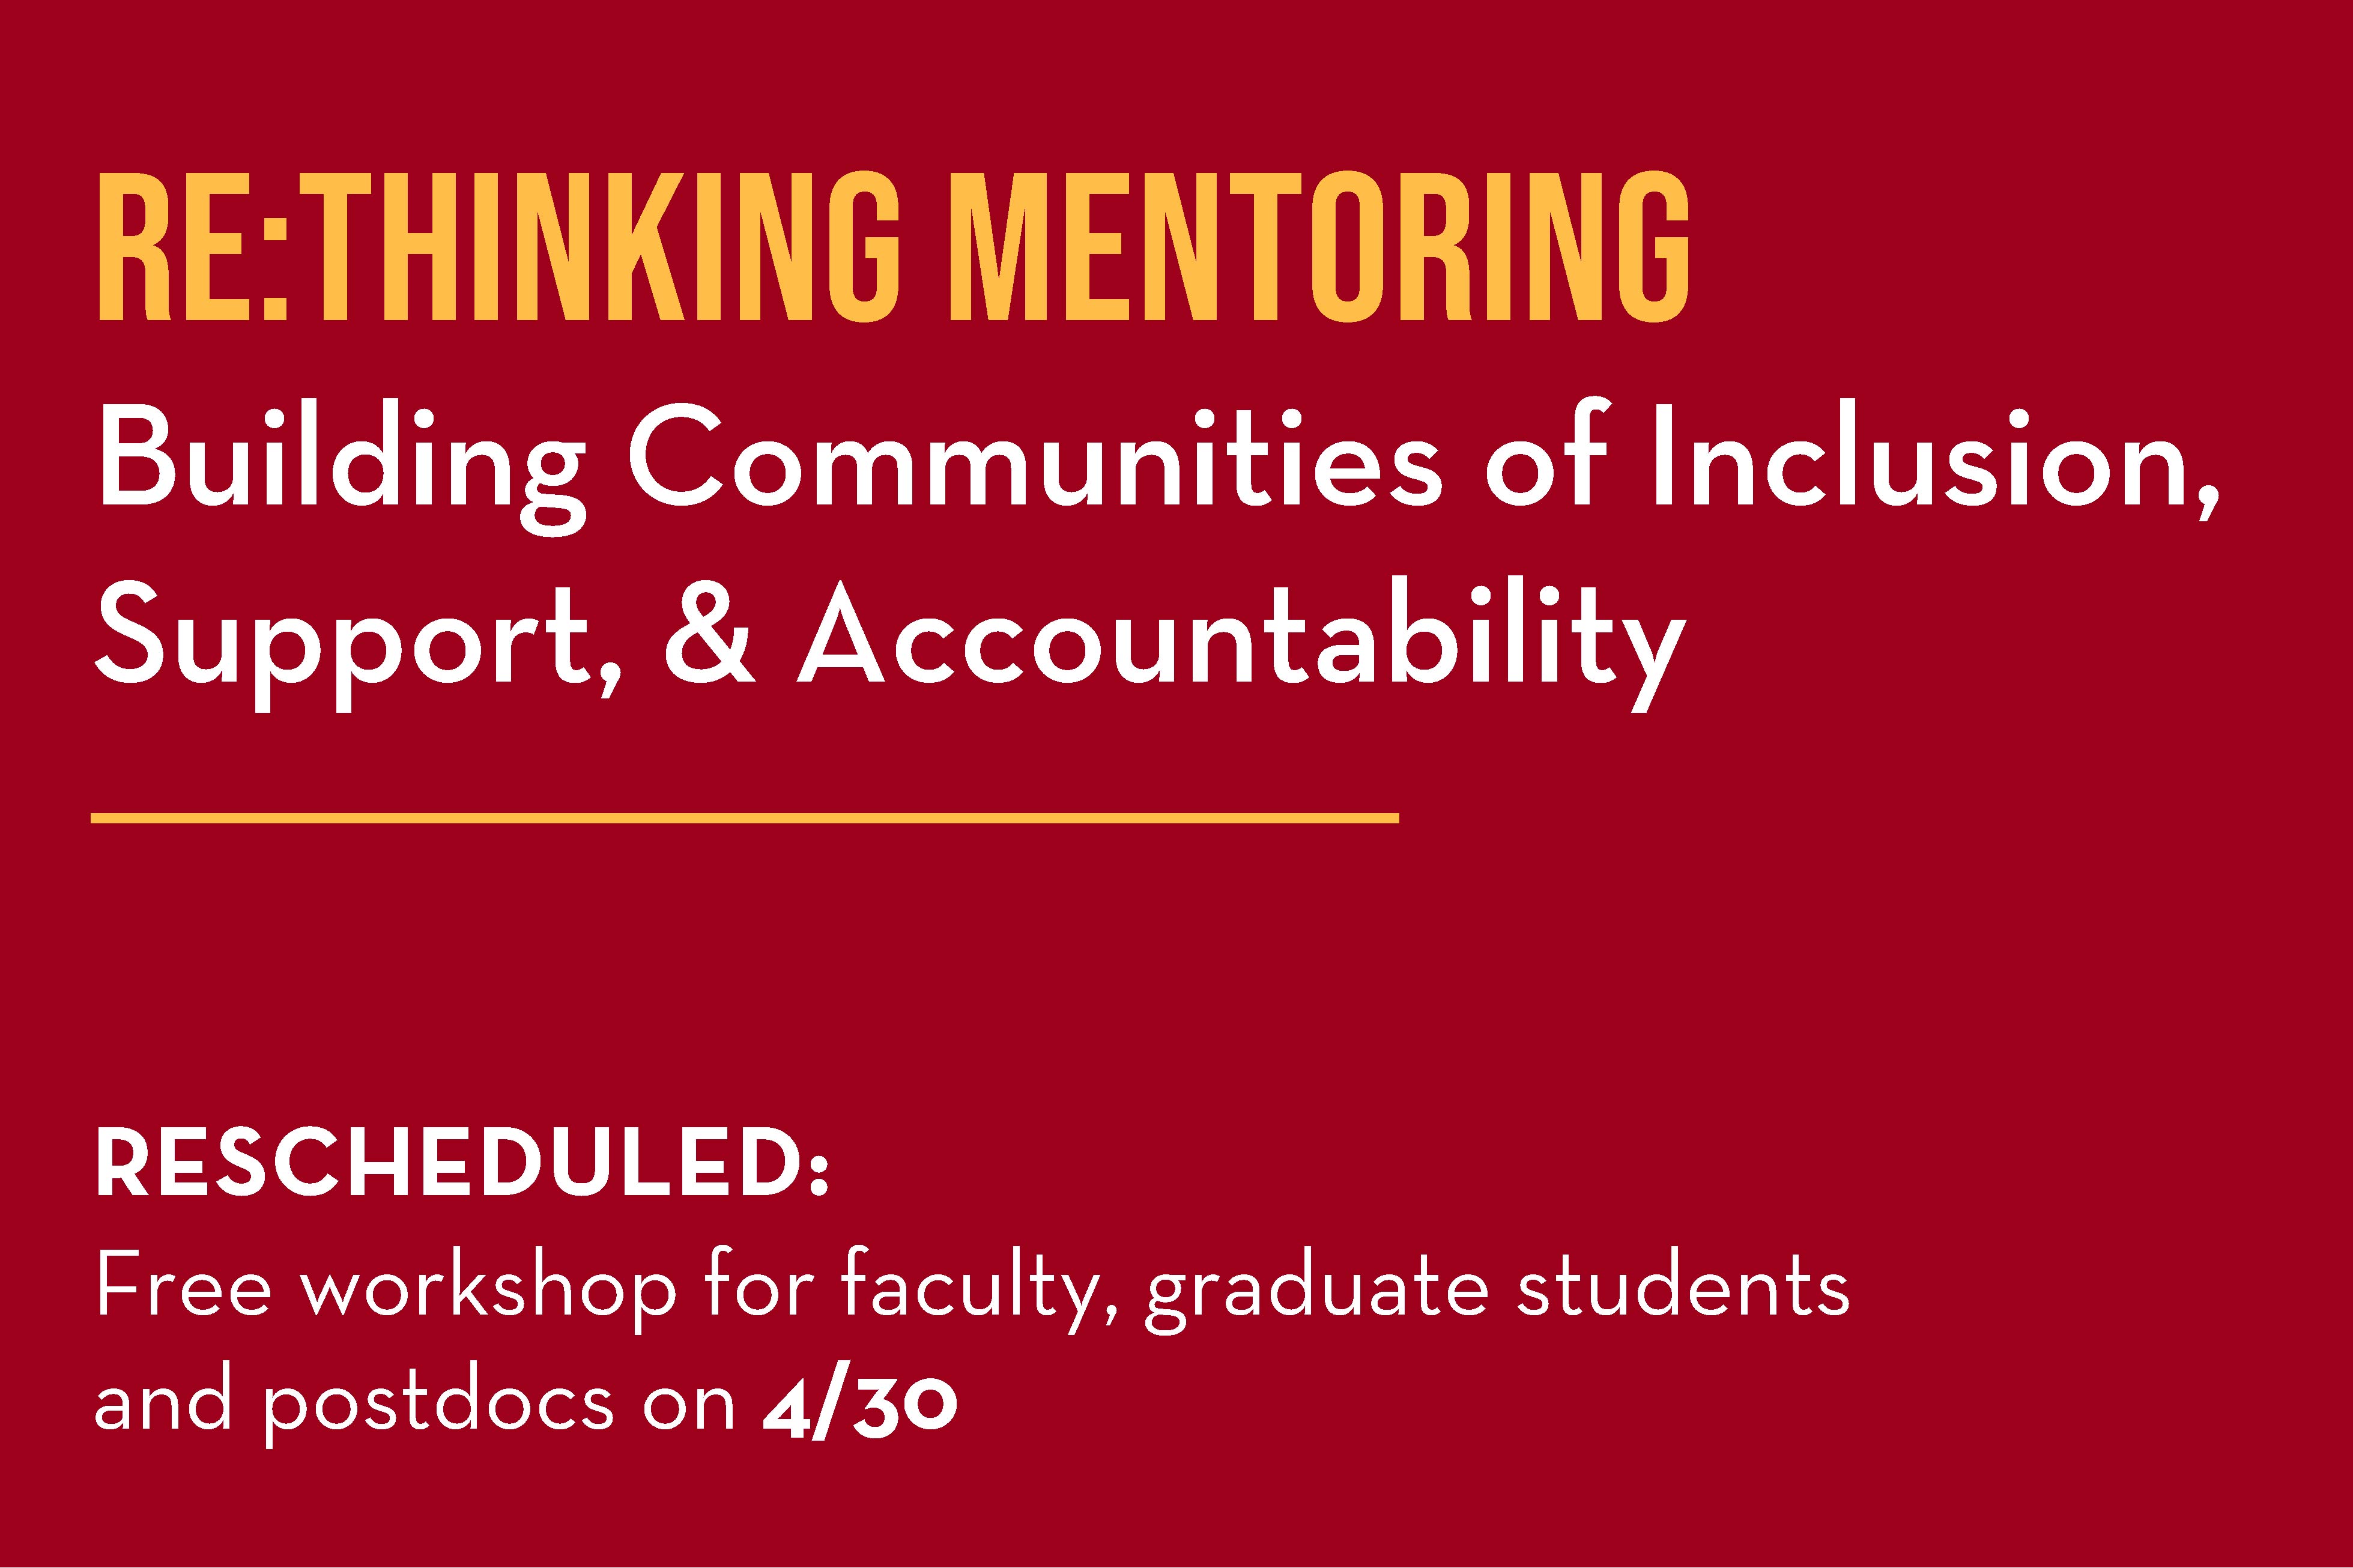 Rethinking Mentoring: Building Communities of Inclusion, Support, & Accountability; free workshop on April 30